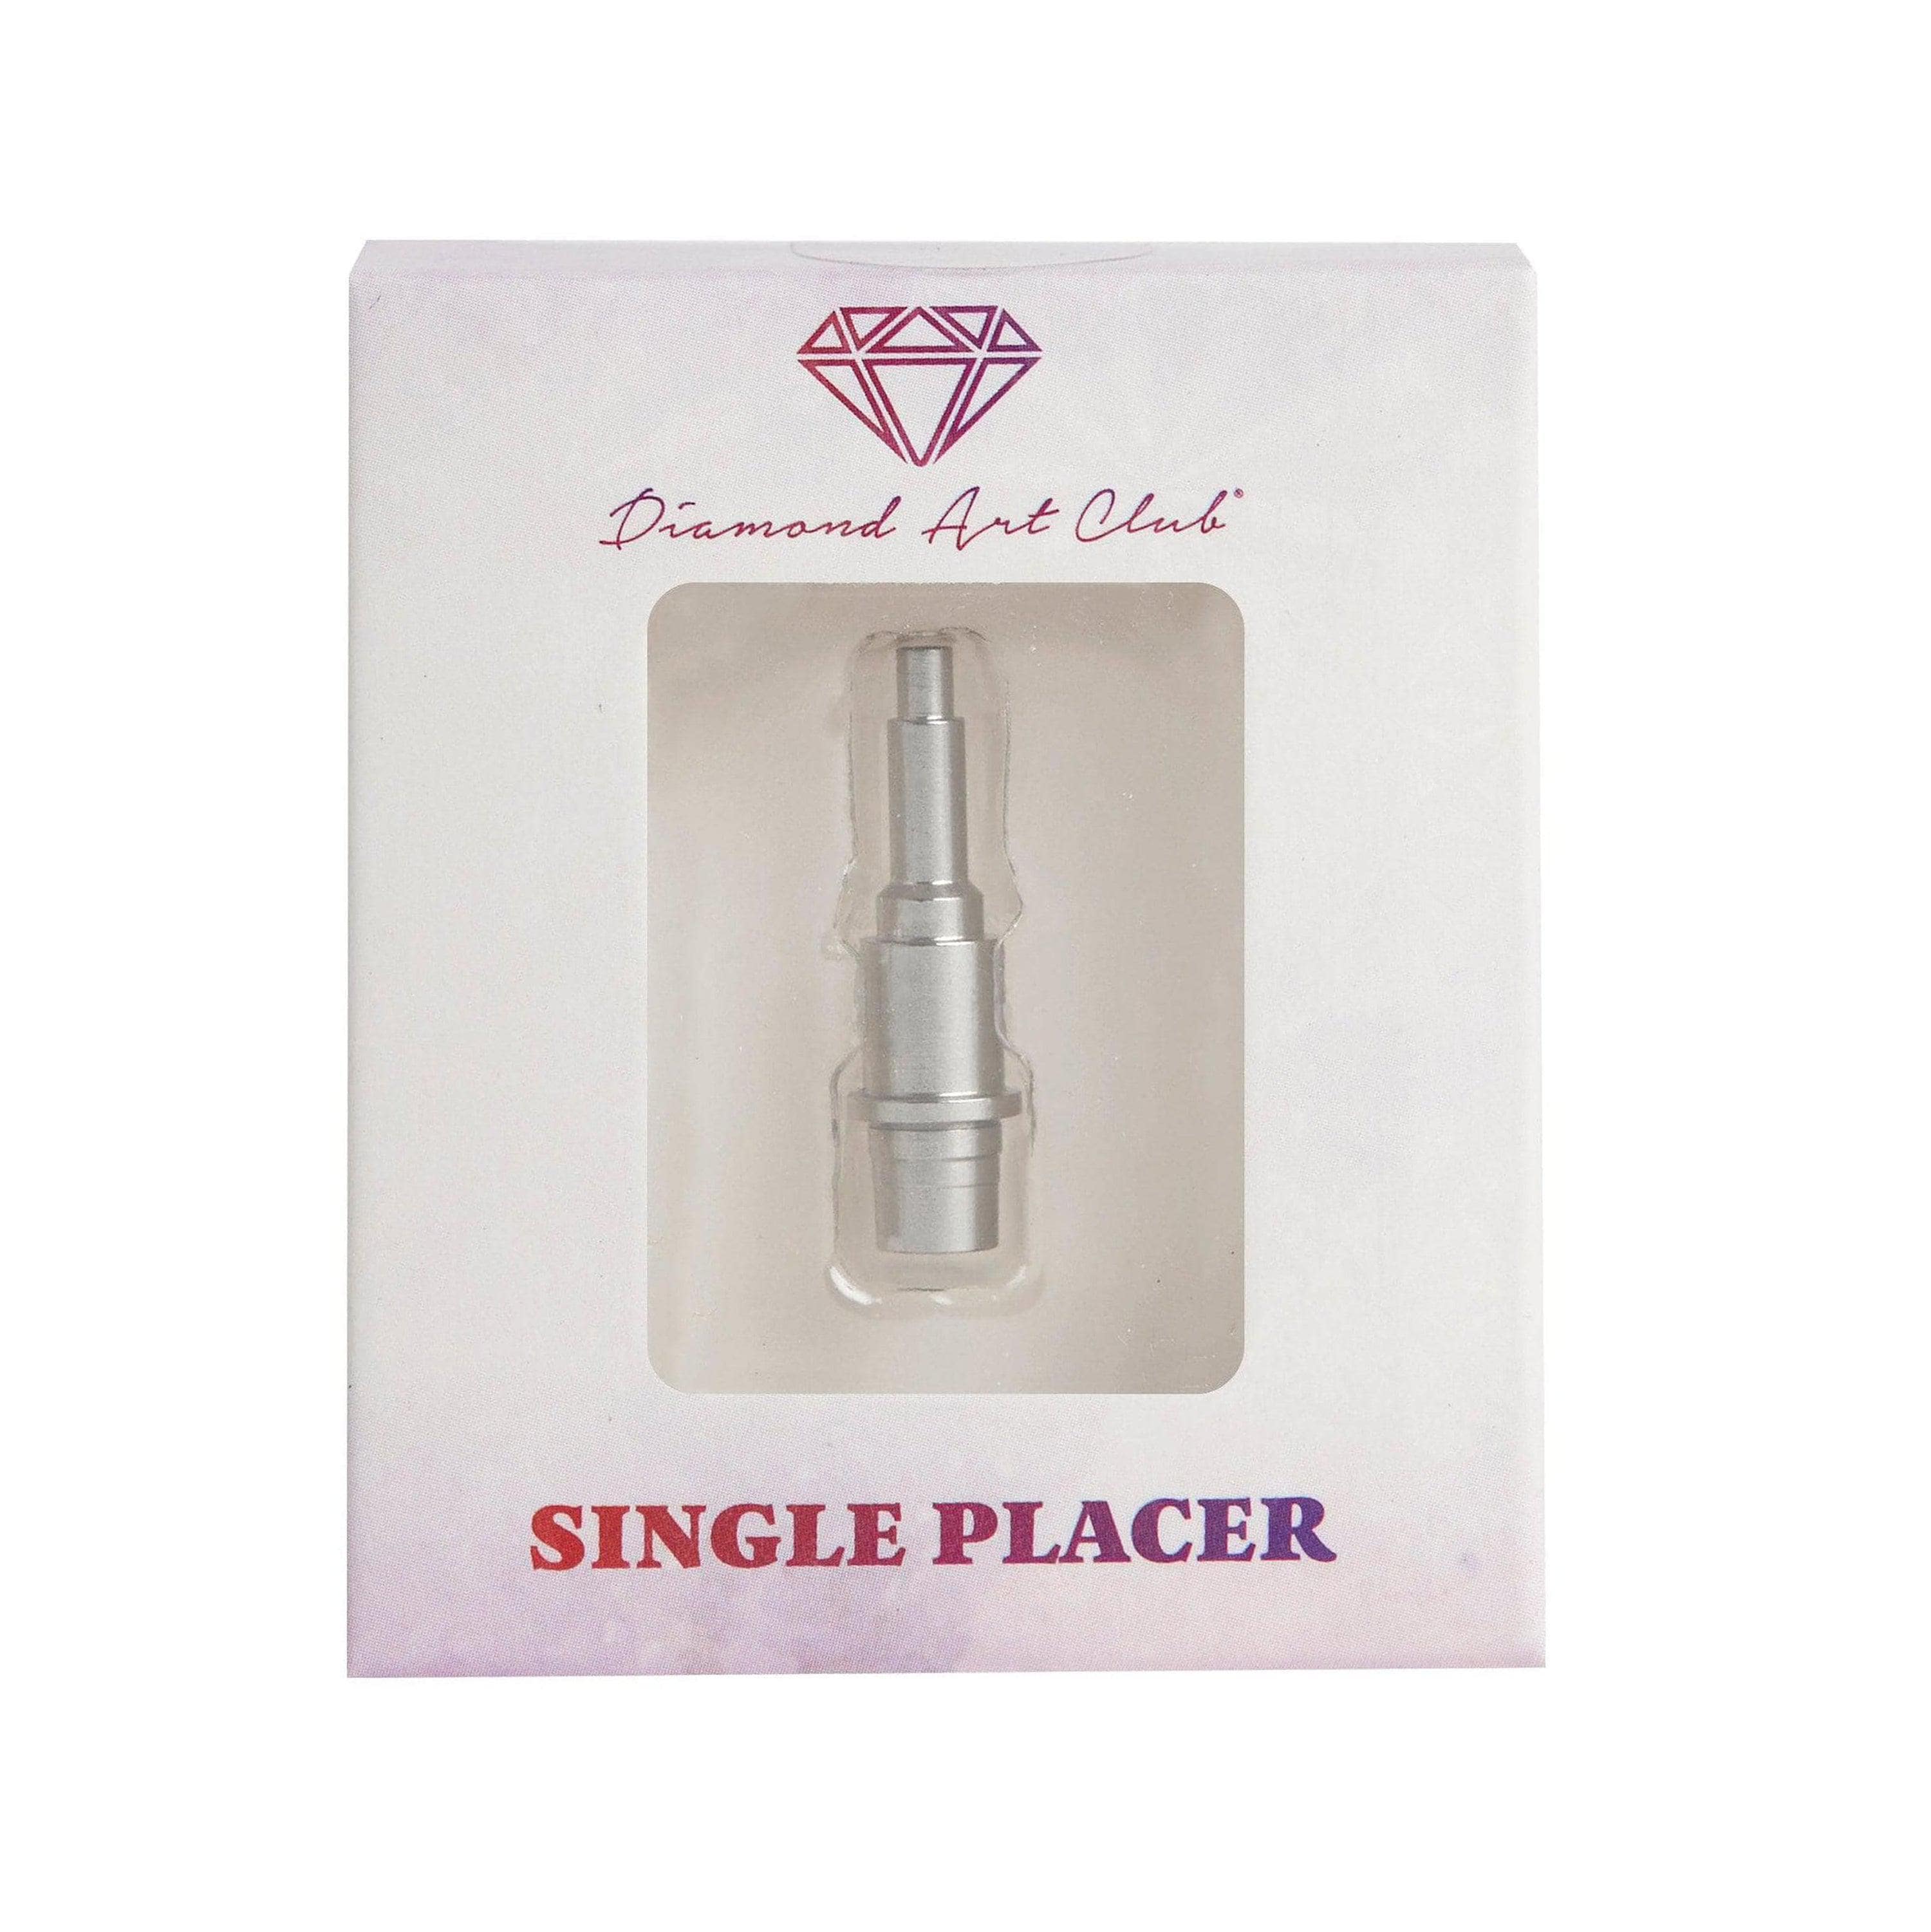 Comprar Perfectly Painting Pen Shaped Diamond Painting Paper